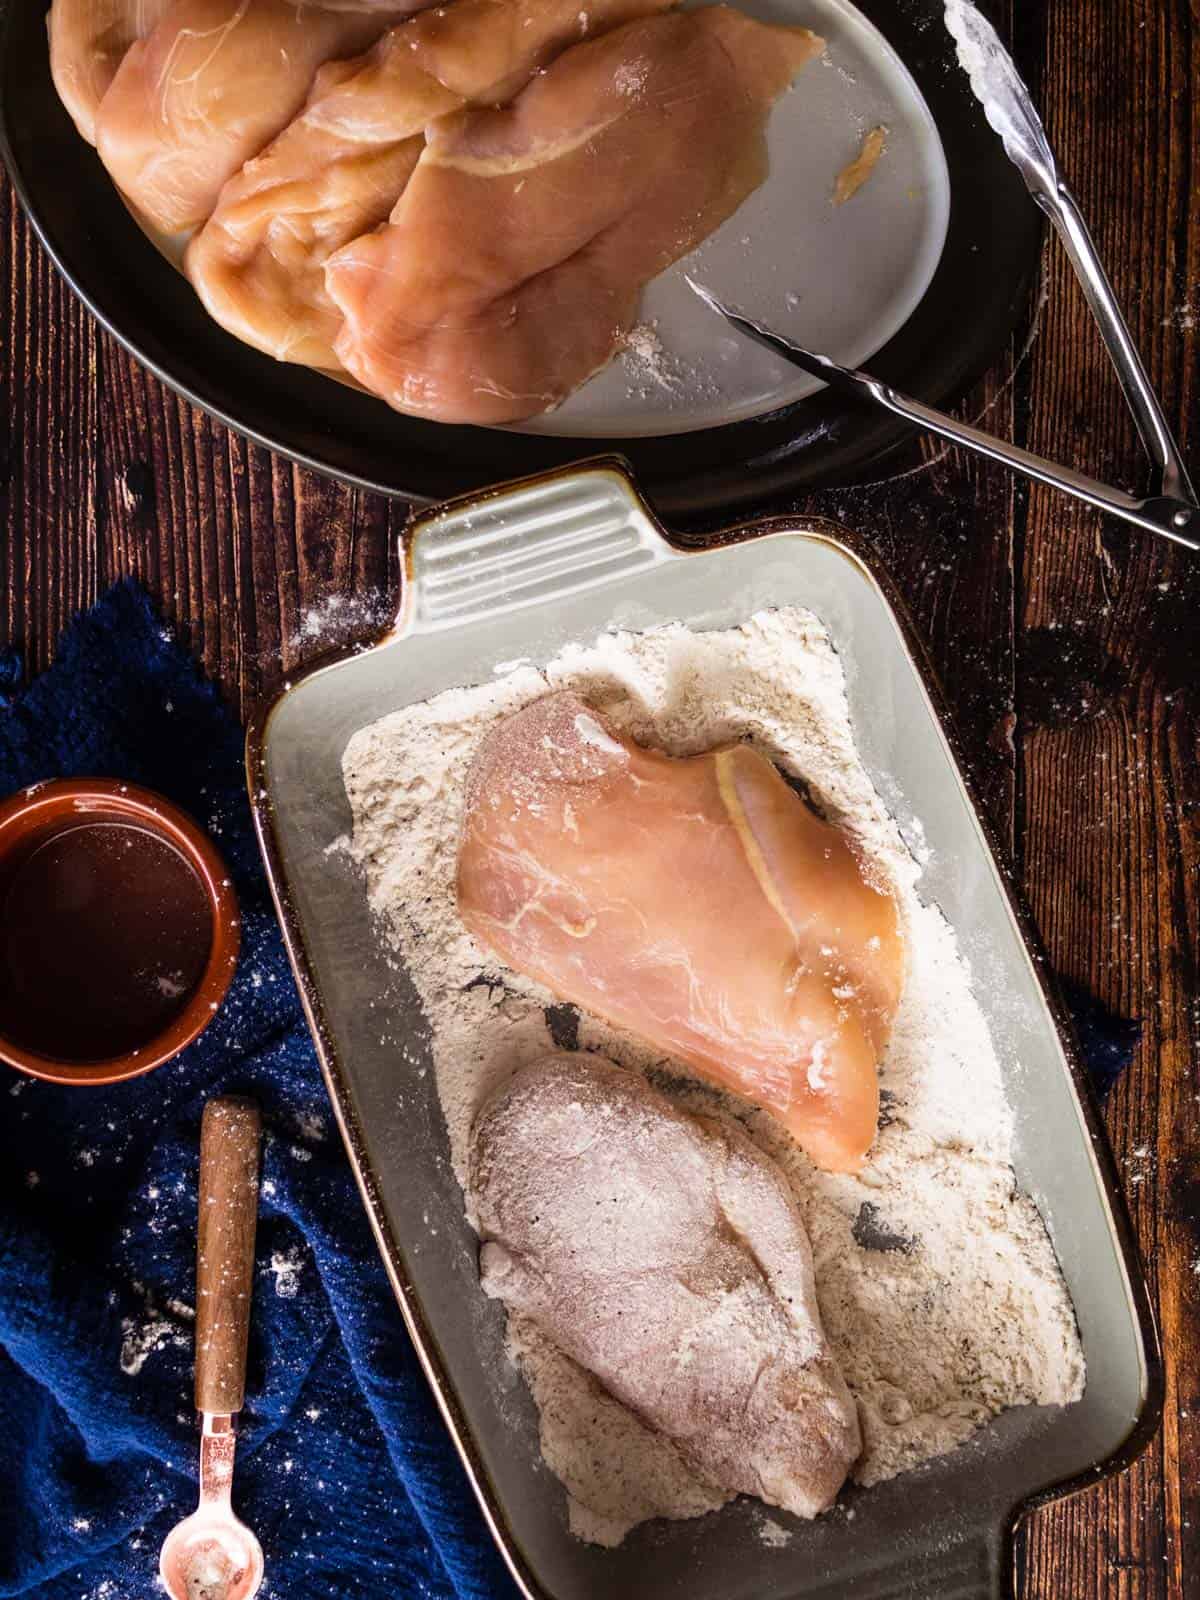 raw chicken on a plate and dipped in flour in a dish.